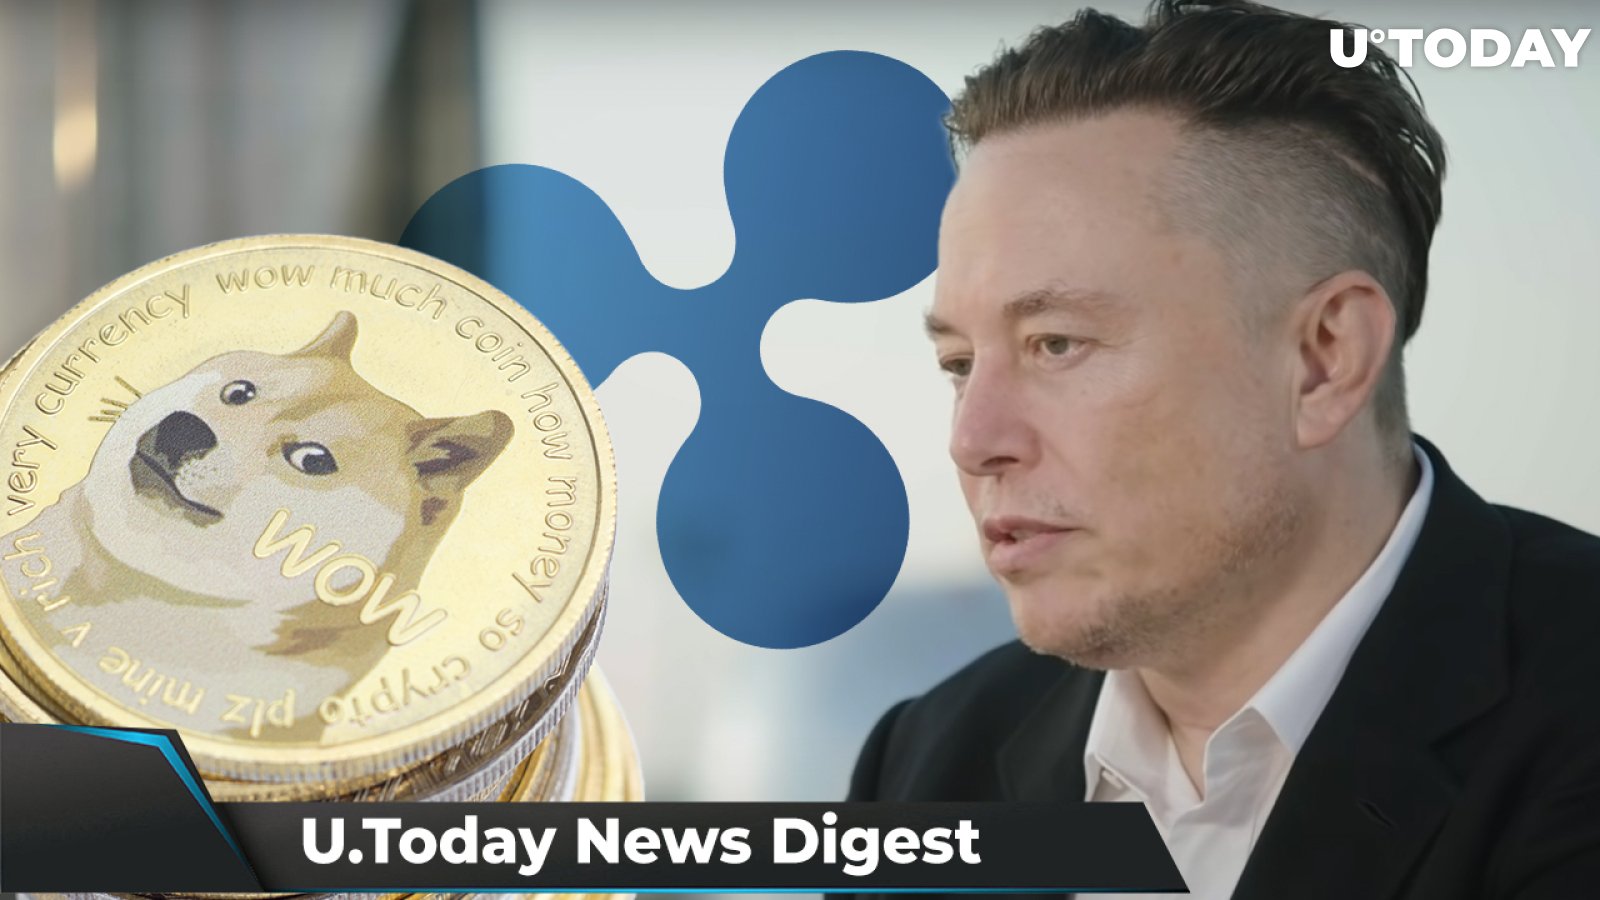 SHIB Accepted by Delivery App, DOGE Pumps on Elon Musk’s Offer to Buy Twitter, ETH Surged Above $3,100: Crypto News Digest by U.Today